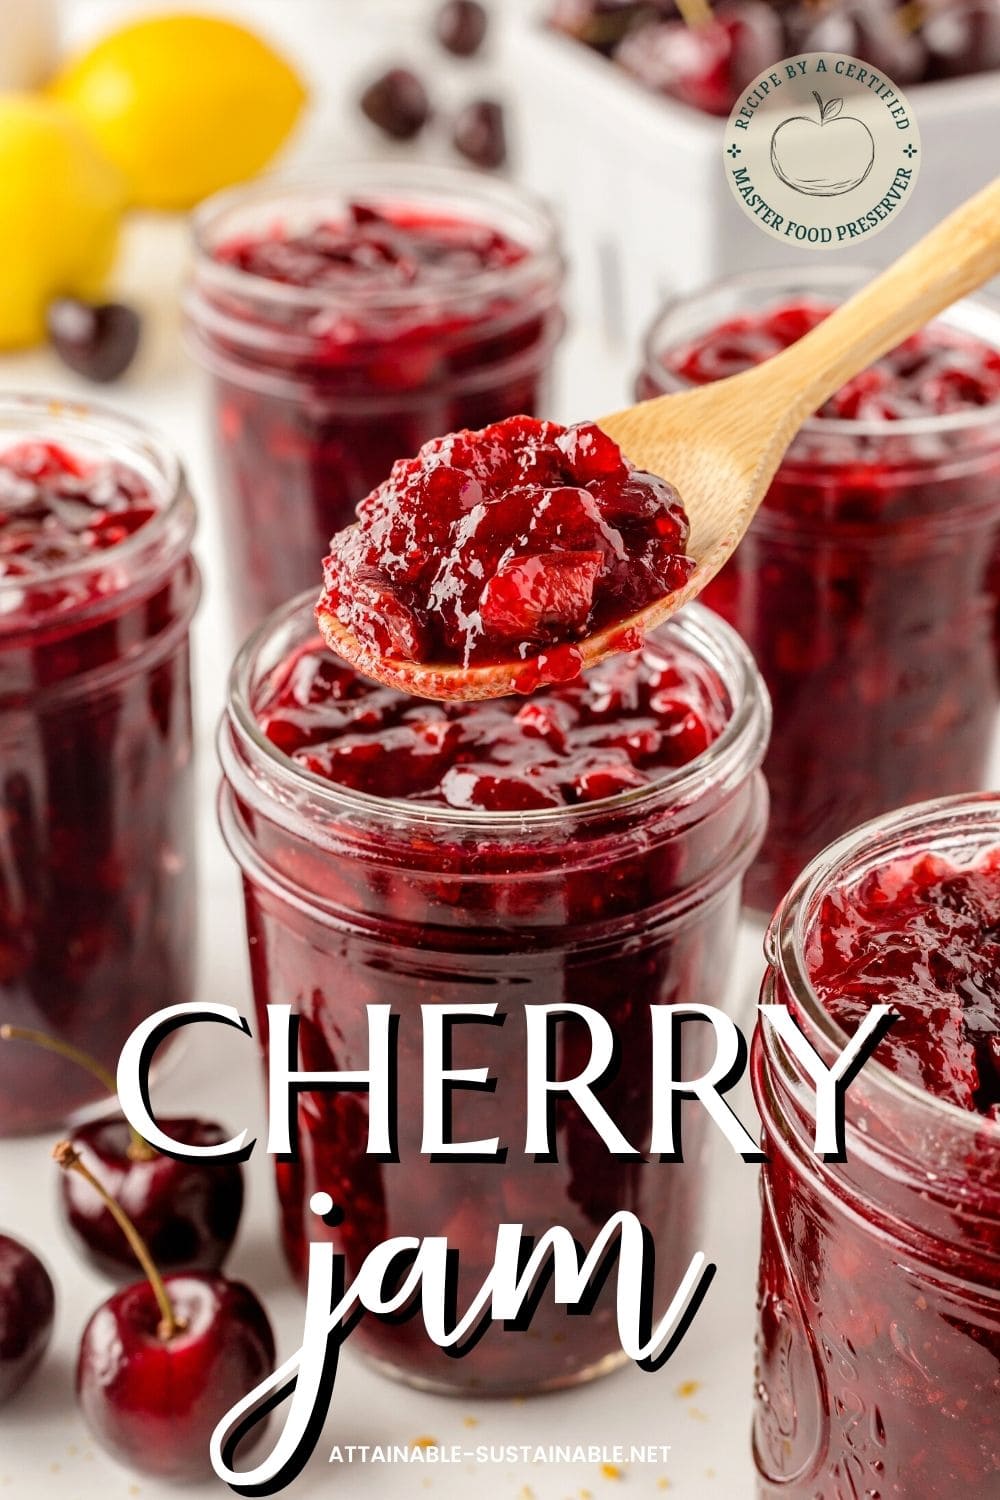 jars of cherry jam, one wooden spoon scooping jam out of a jar.